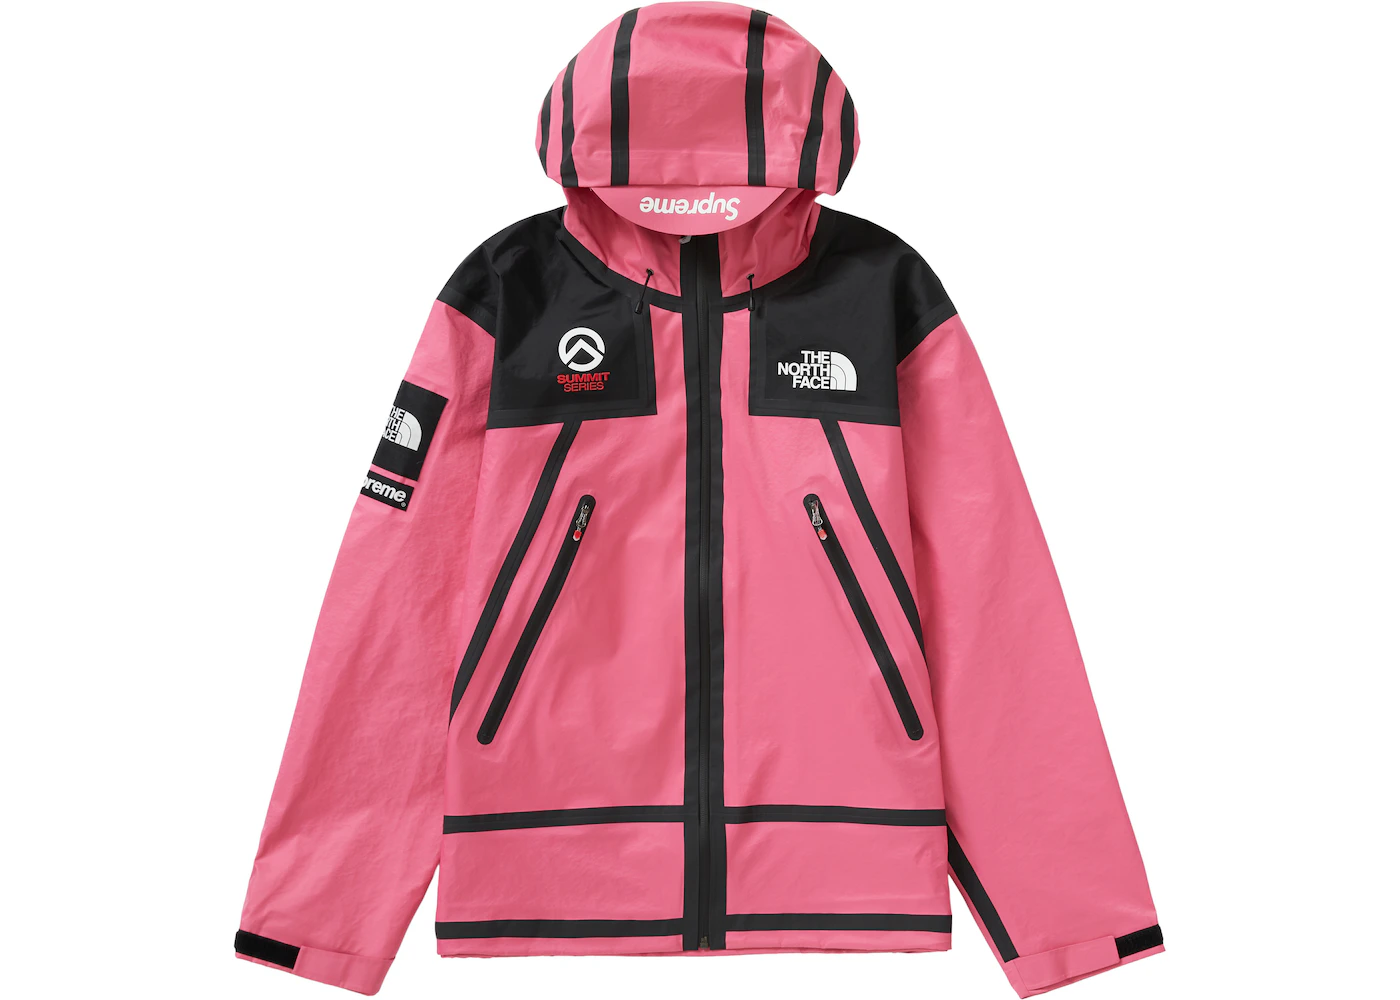 Paleis Competitief Latijns Supreme The North Face Summit Series Outer Tape Seam Jacket Pink - SS21  Men's - US